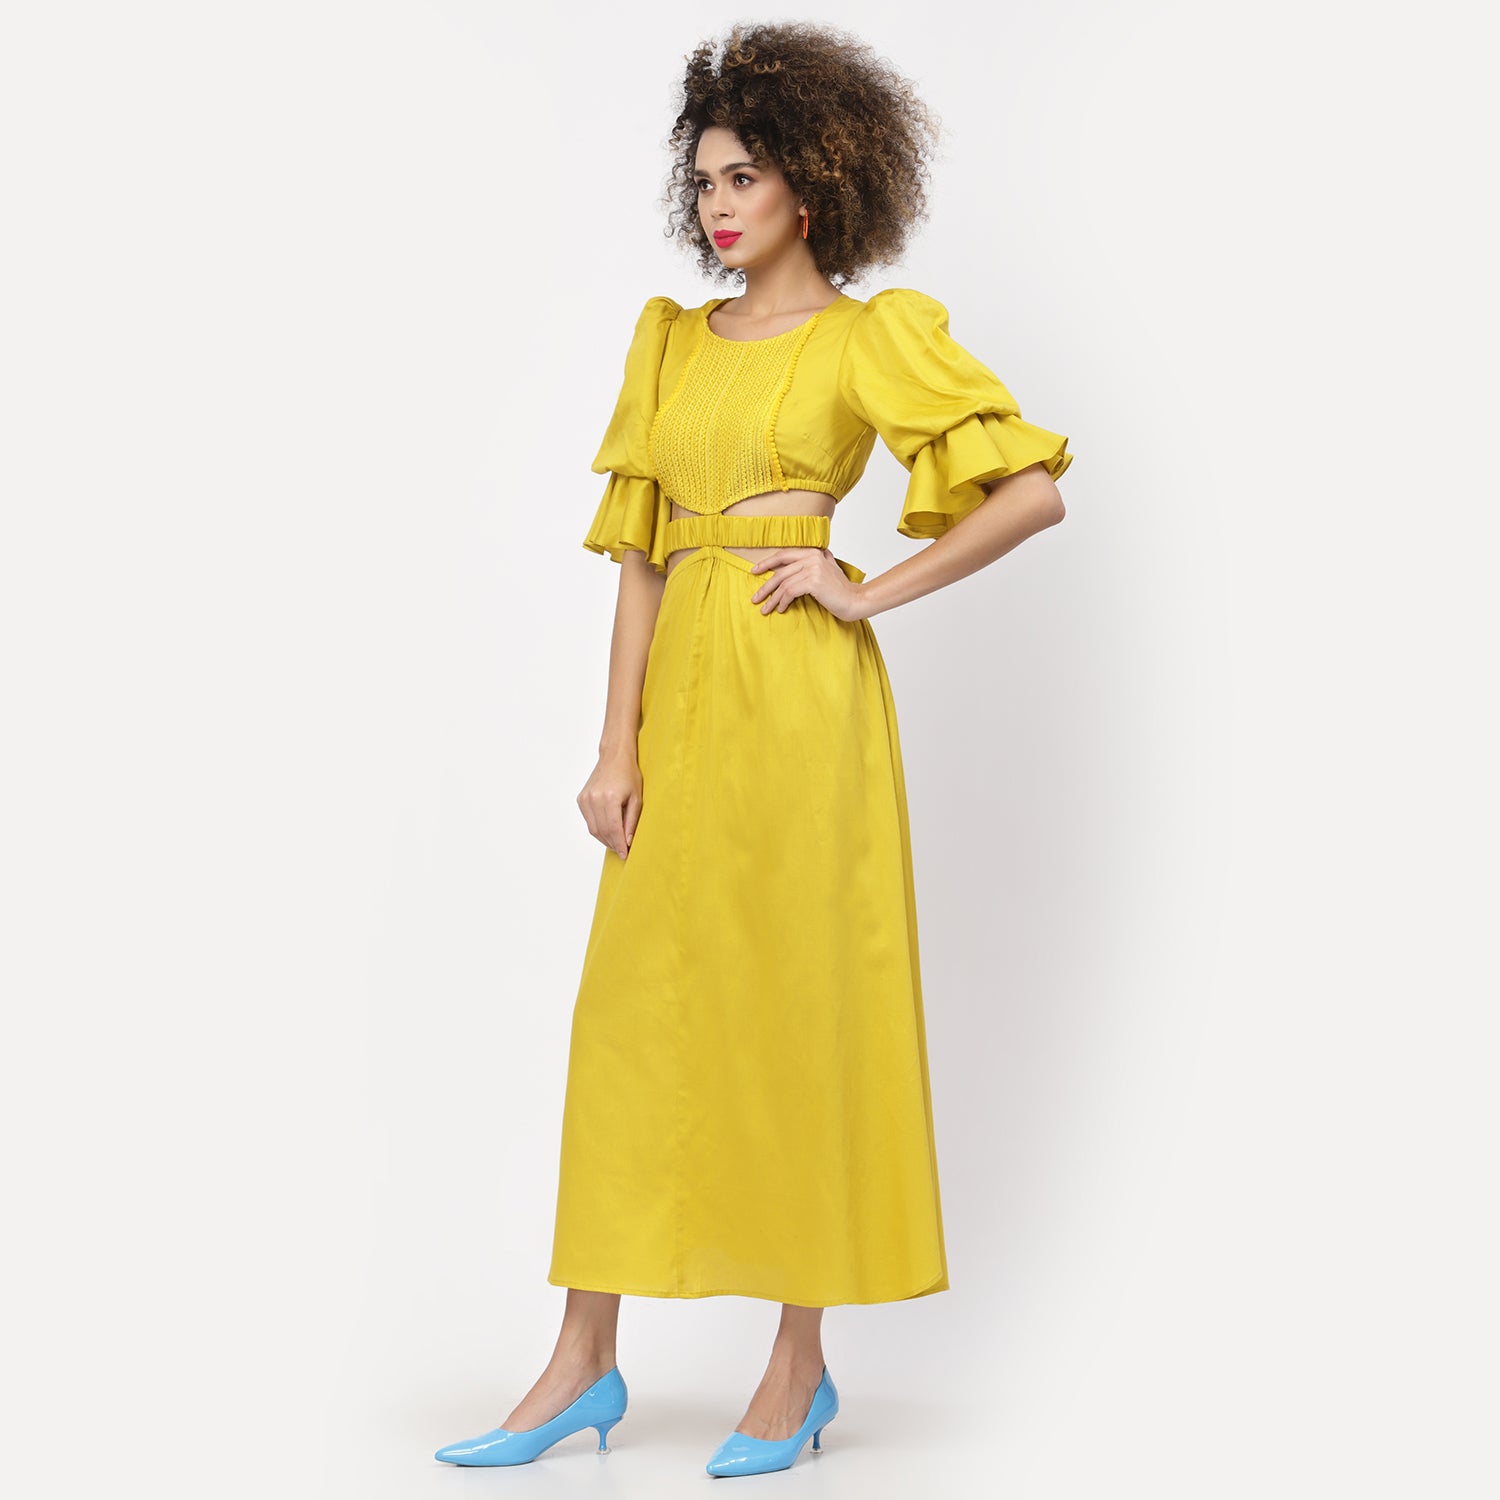 Yellow Dress With Lace Yoke And Tie Belt